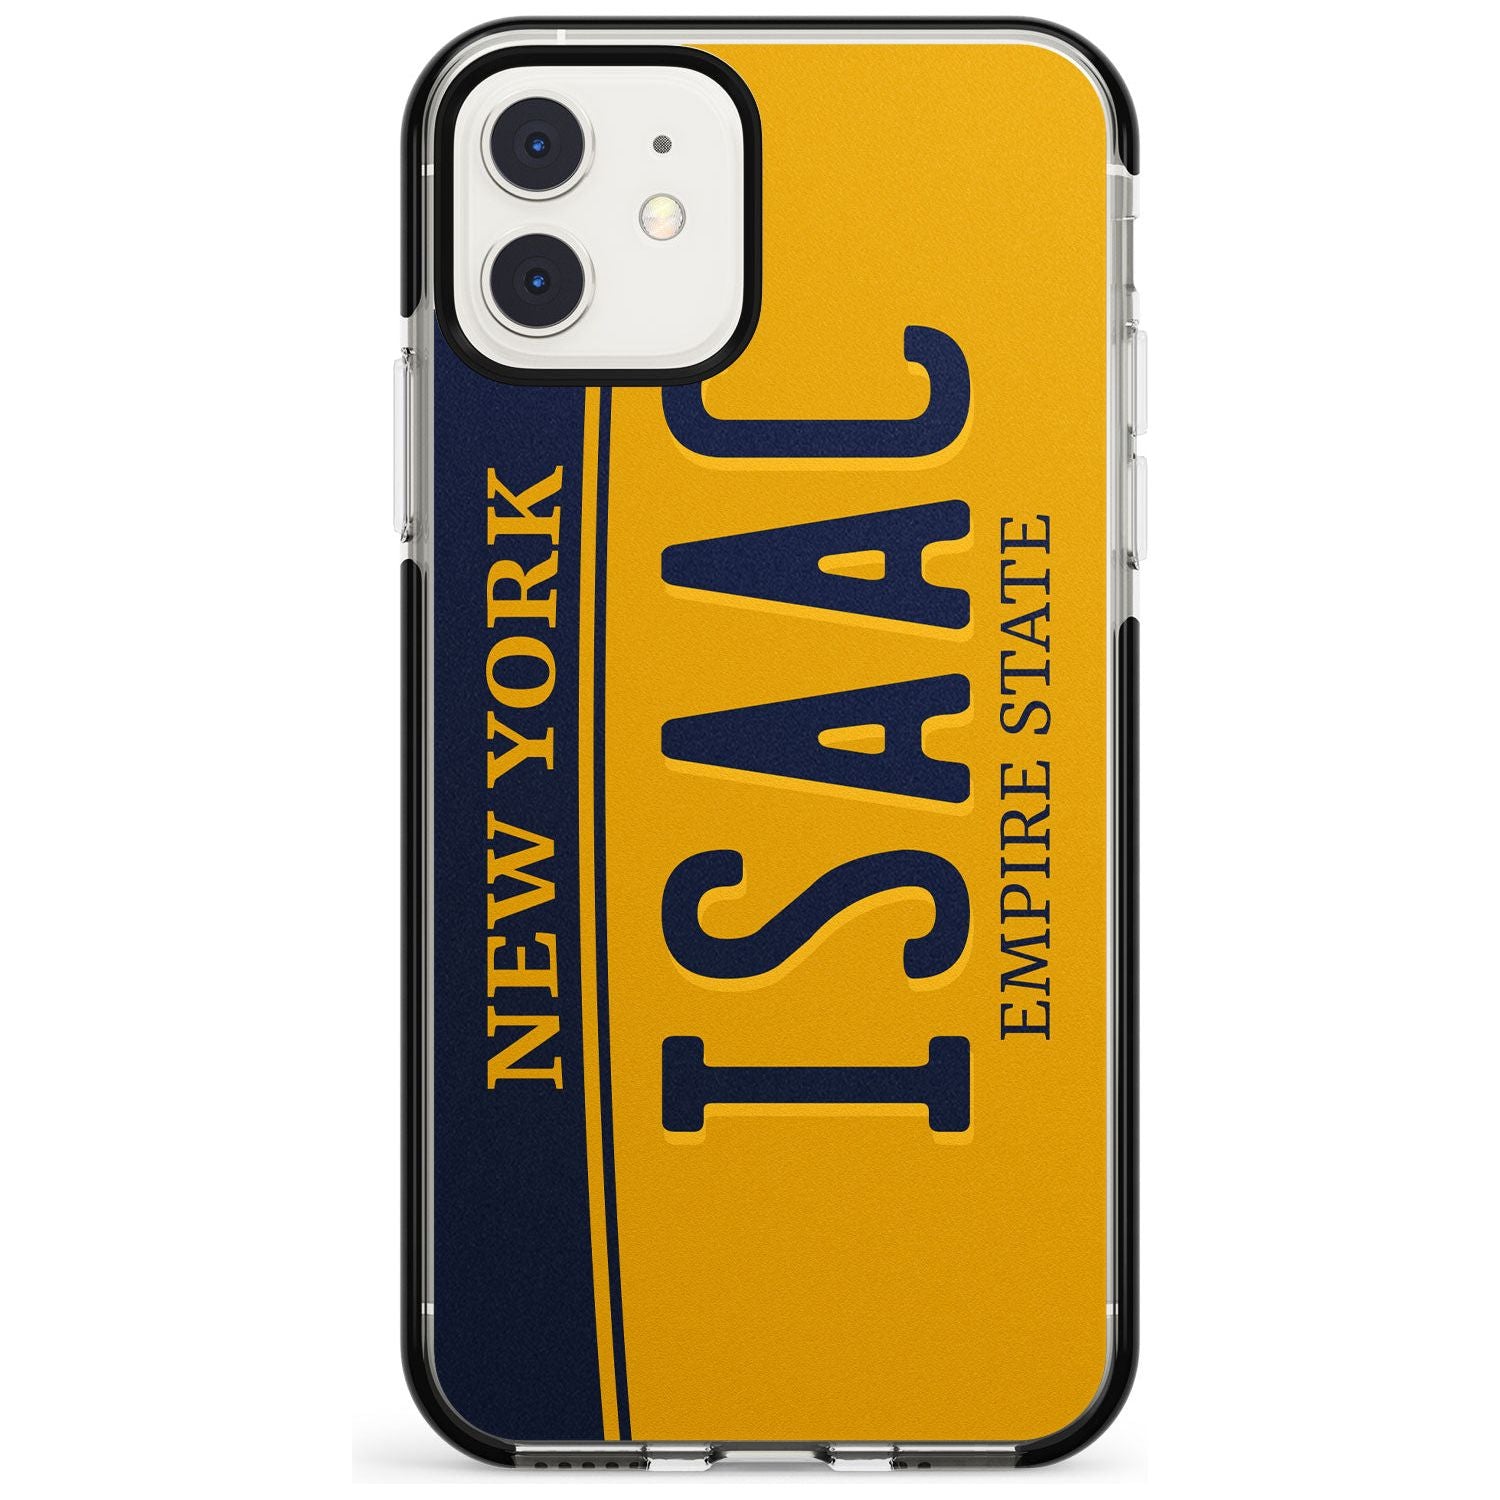 New York License Plate Pink Fade Impact Phone Case for iPhone 11 Pro Max